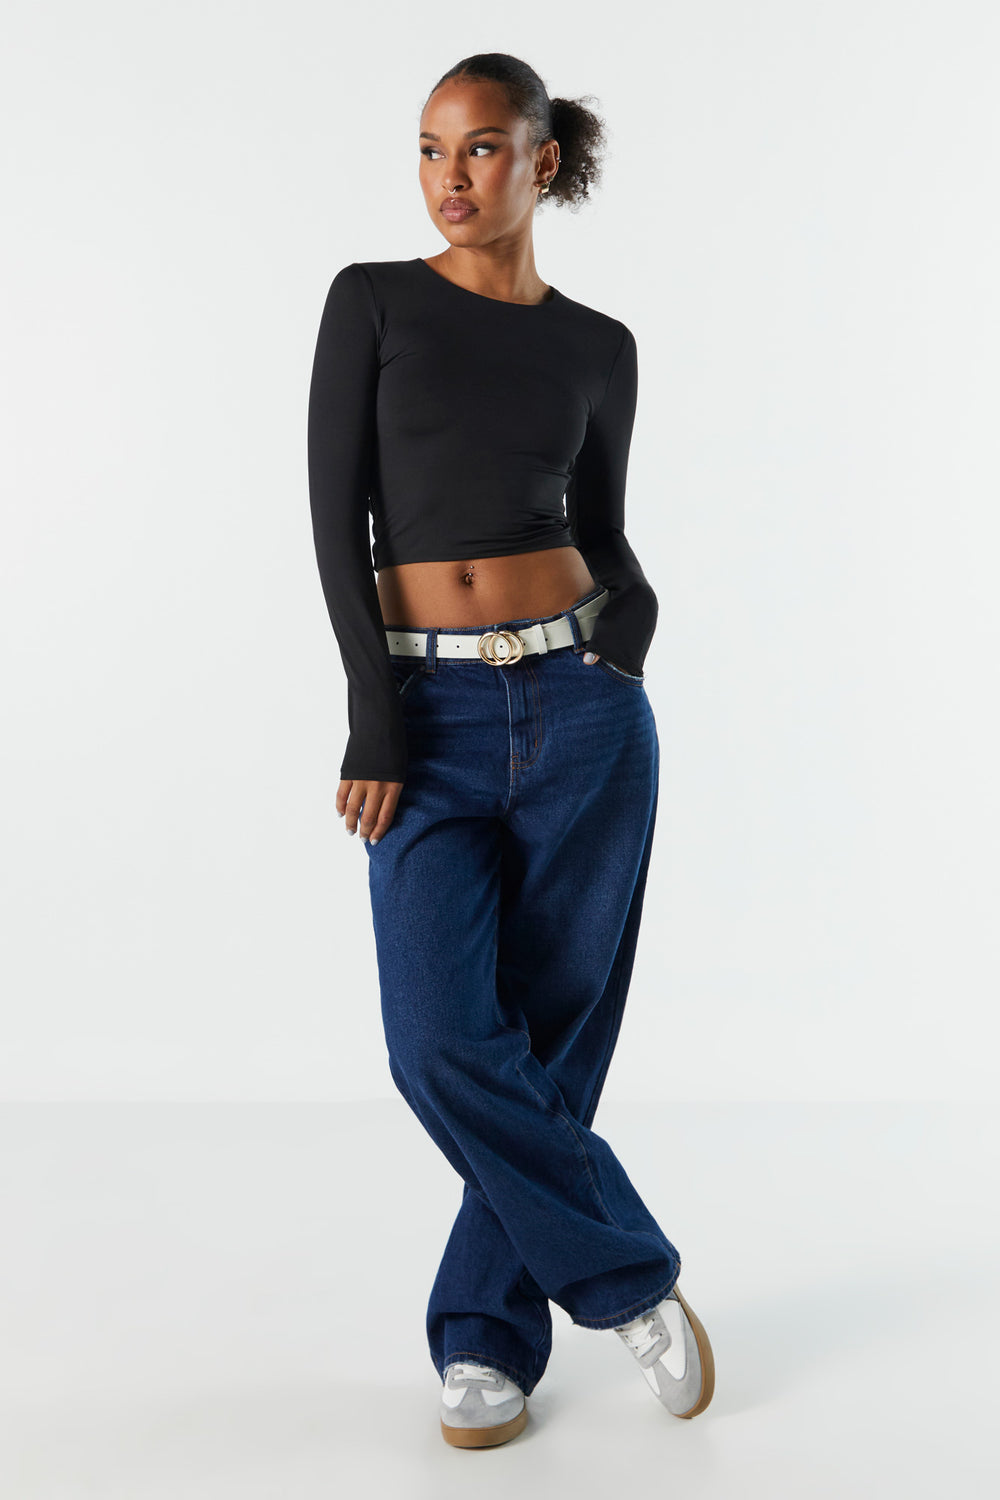 Contour Cropped Long Sleeve Top Contour Cropped Long Sleeve Top 6